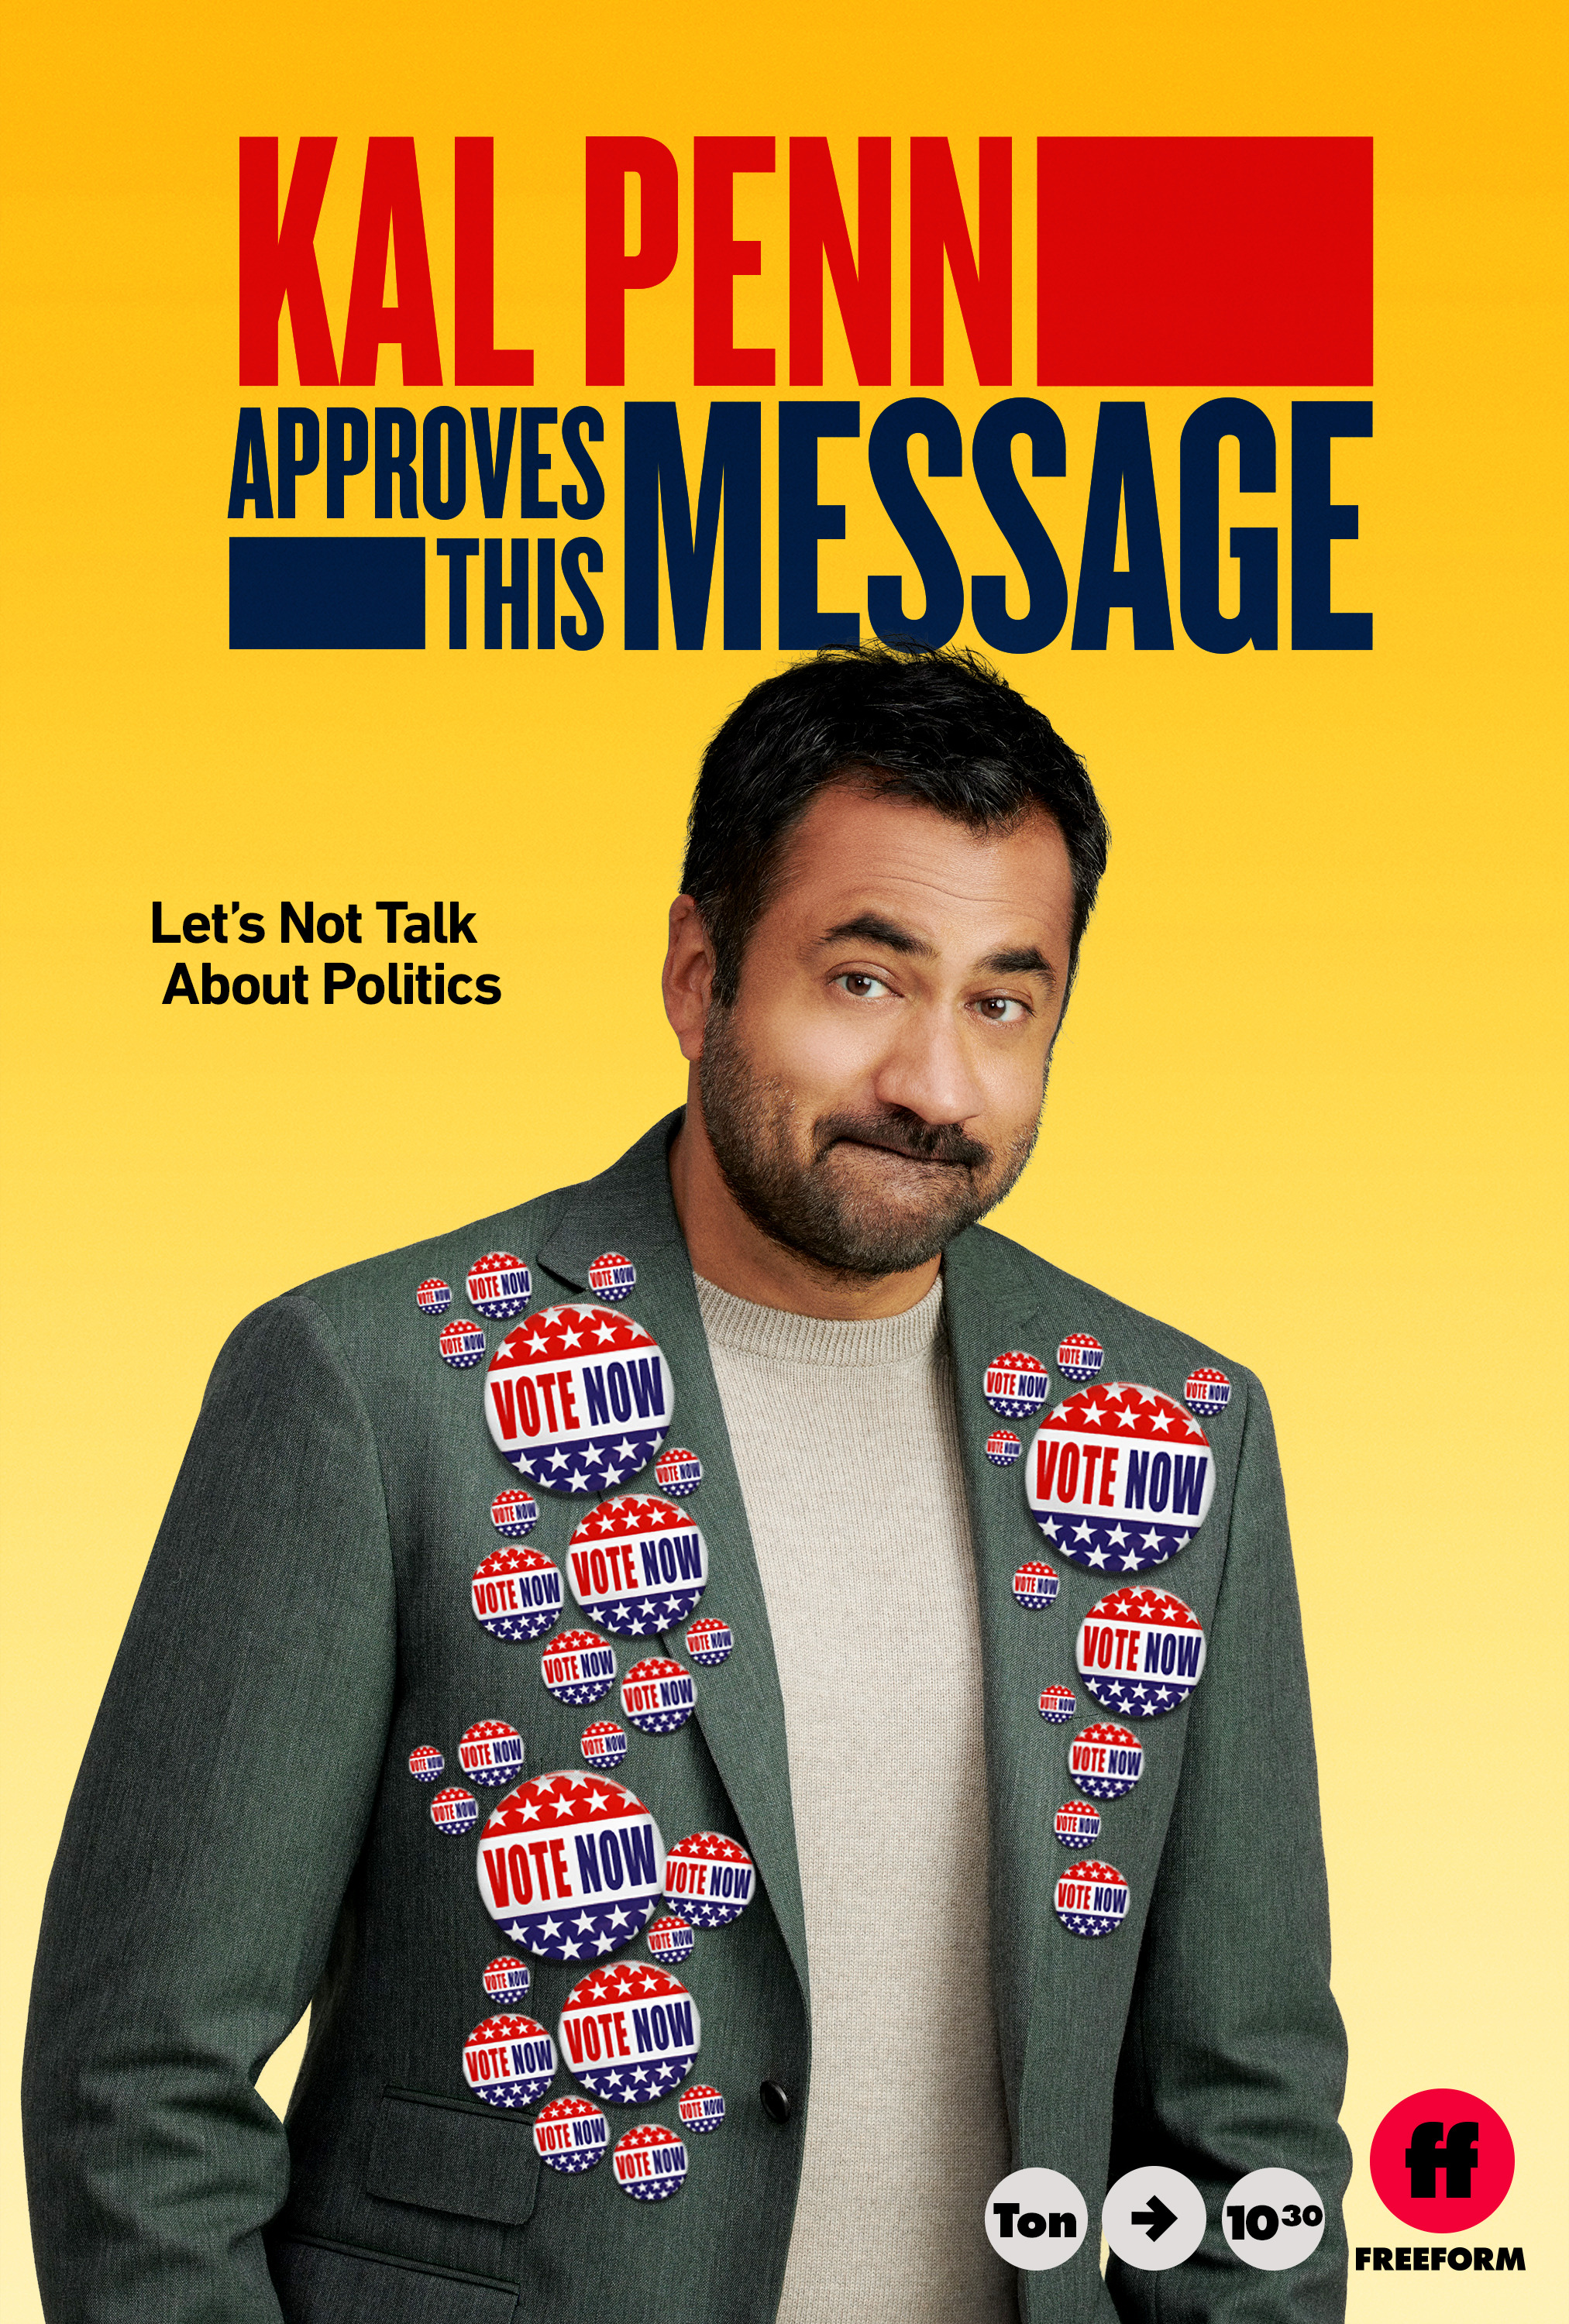 Mega Sized TV Poster Image for Kal Penn Approves This Message (#2 of 6)